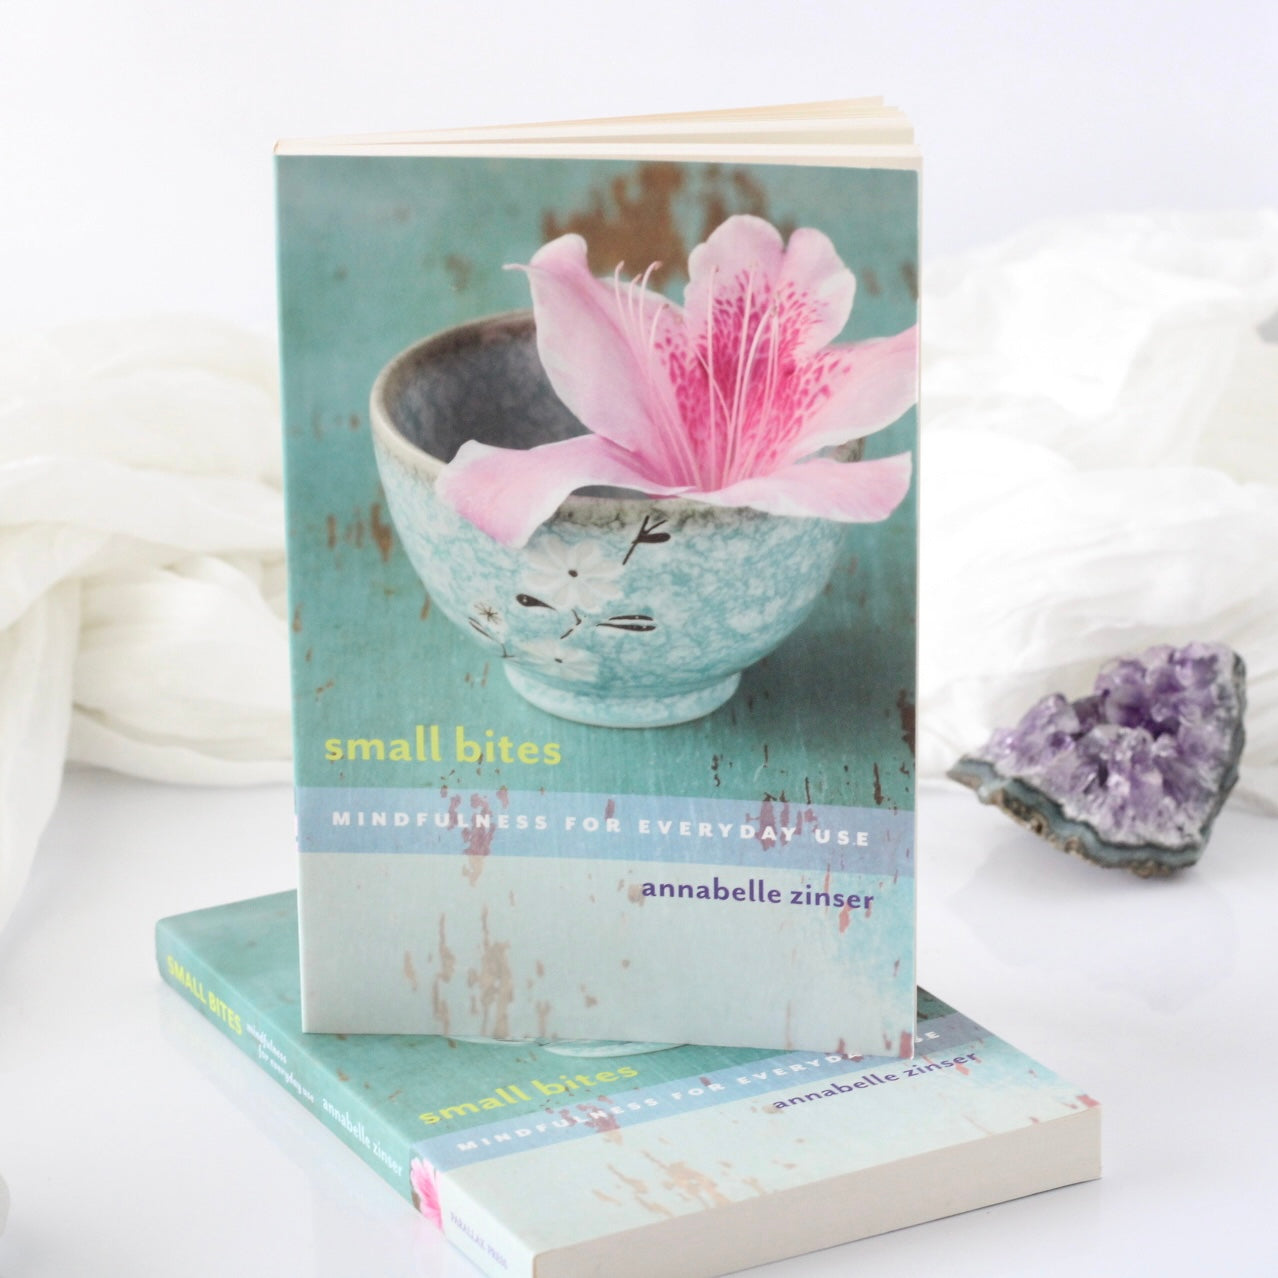 Small Bites: Mindfulness For Everyday Use by Annabelle Zinser